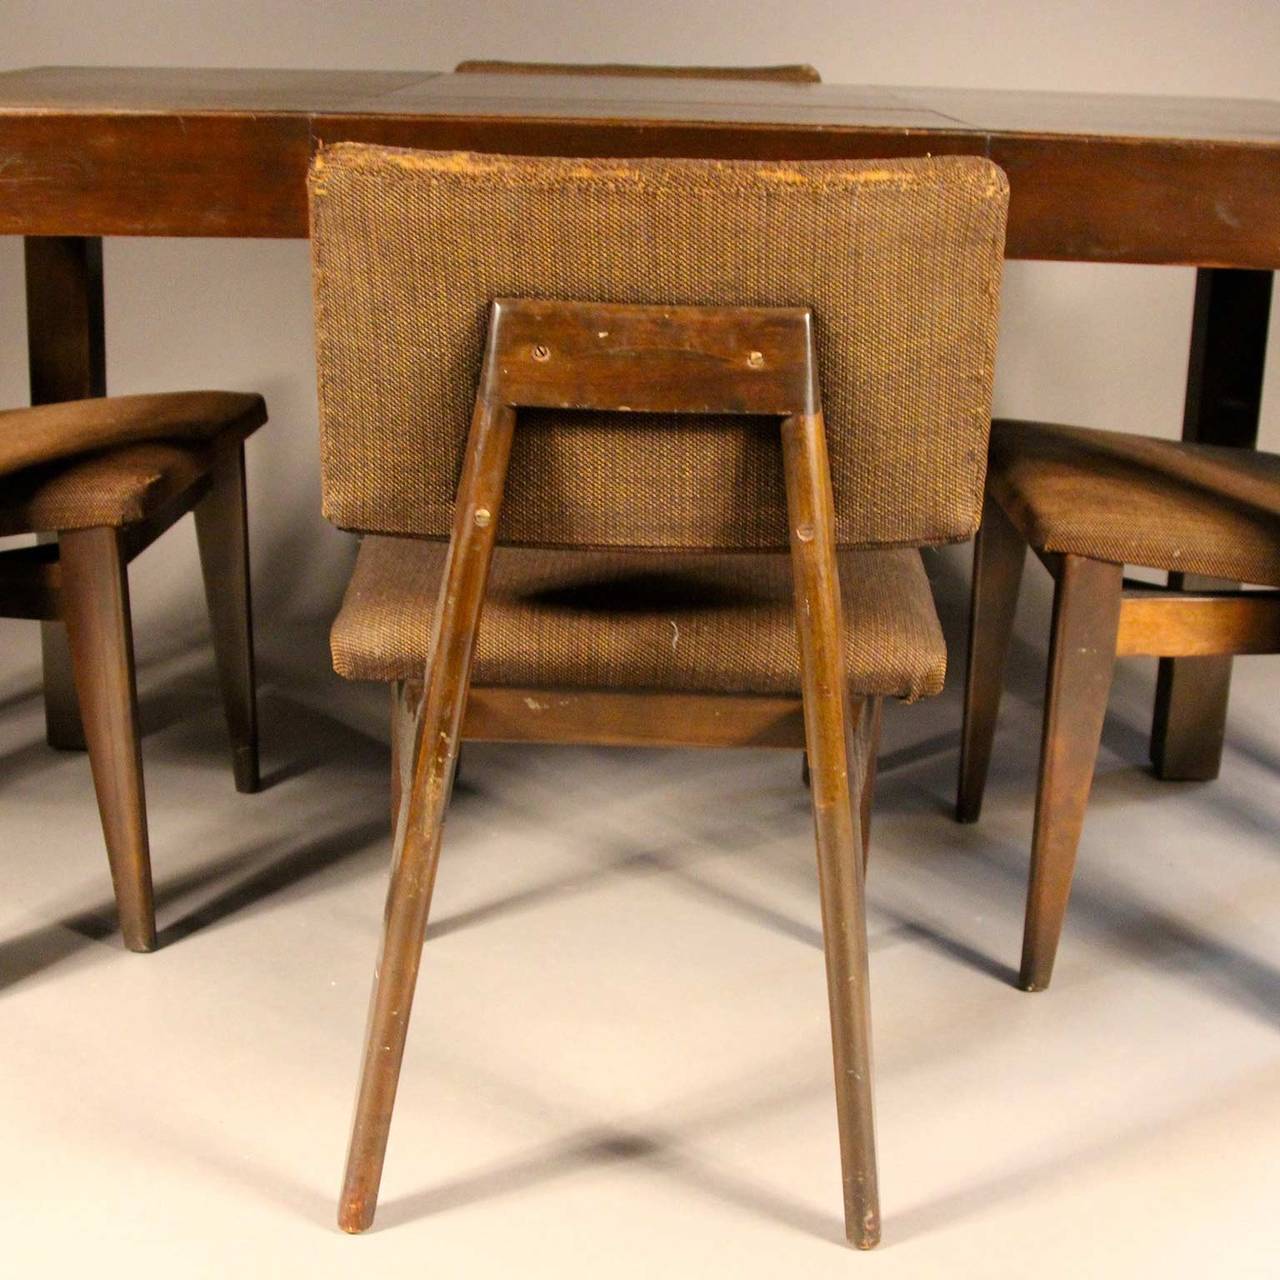 George Nelson for Herman Miller refractory table with two extension leaves that fold open from underneath the table. With four George Nelson side chairs in original finish and fabric.

Beautiful Mid-Century set. Great of apartment or home as it